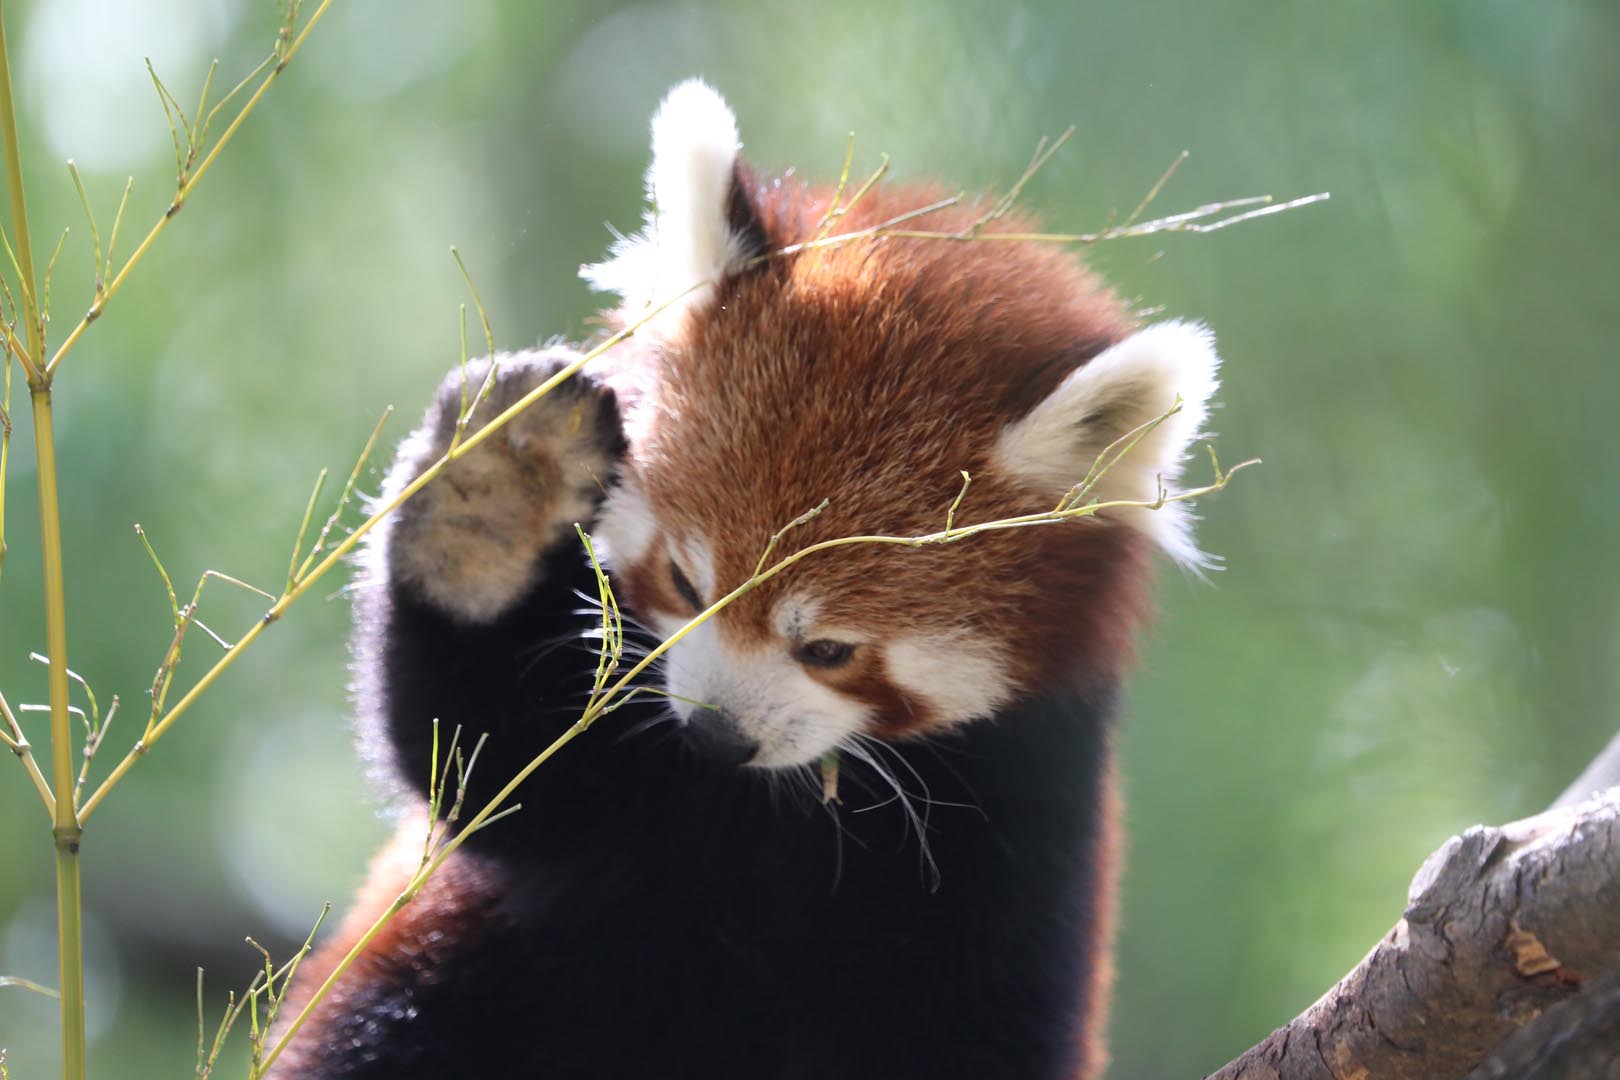 Red panda Ginger eating bamboo with hand up and looking down. IMAGE: Amy Middleton (2022)